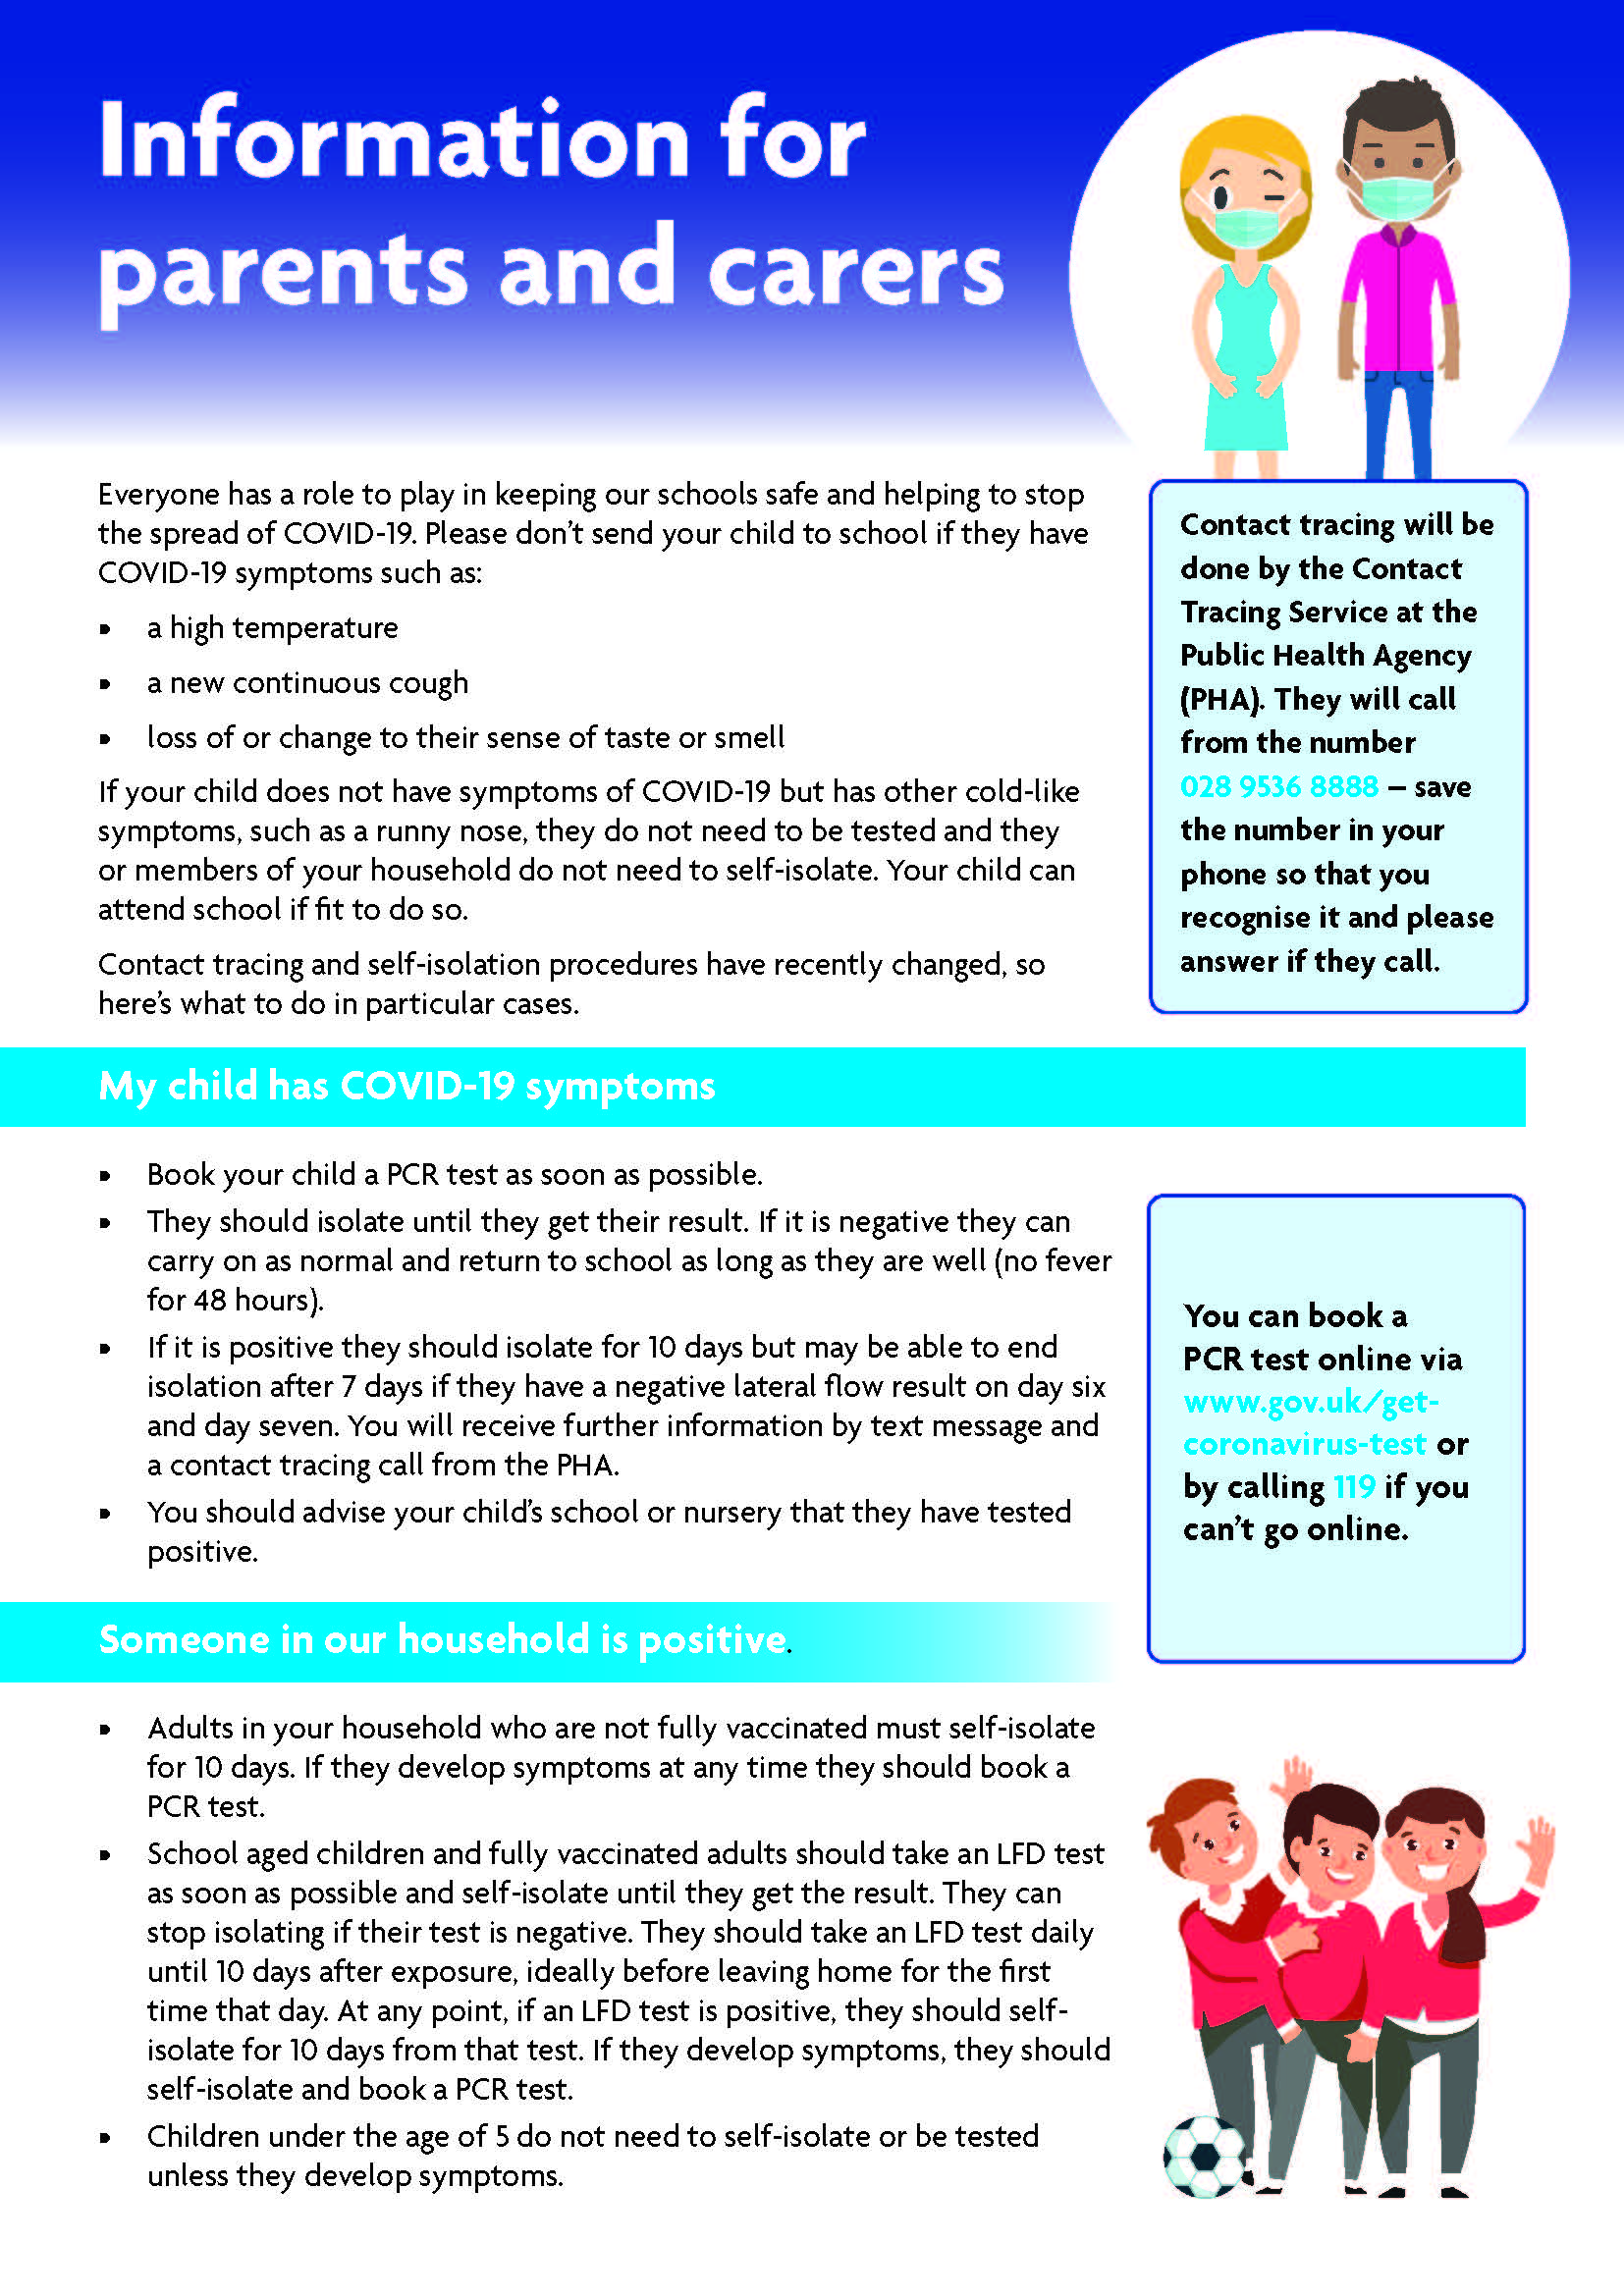 Cover of Information for parents and carers factsheet